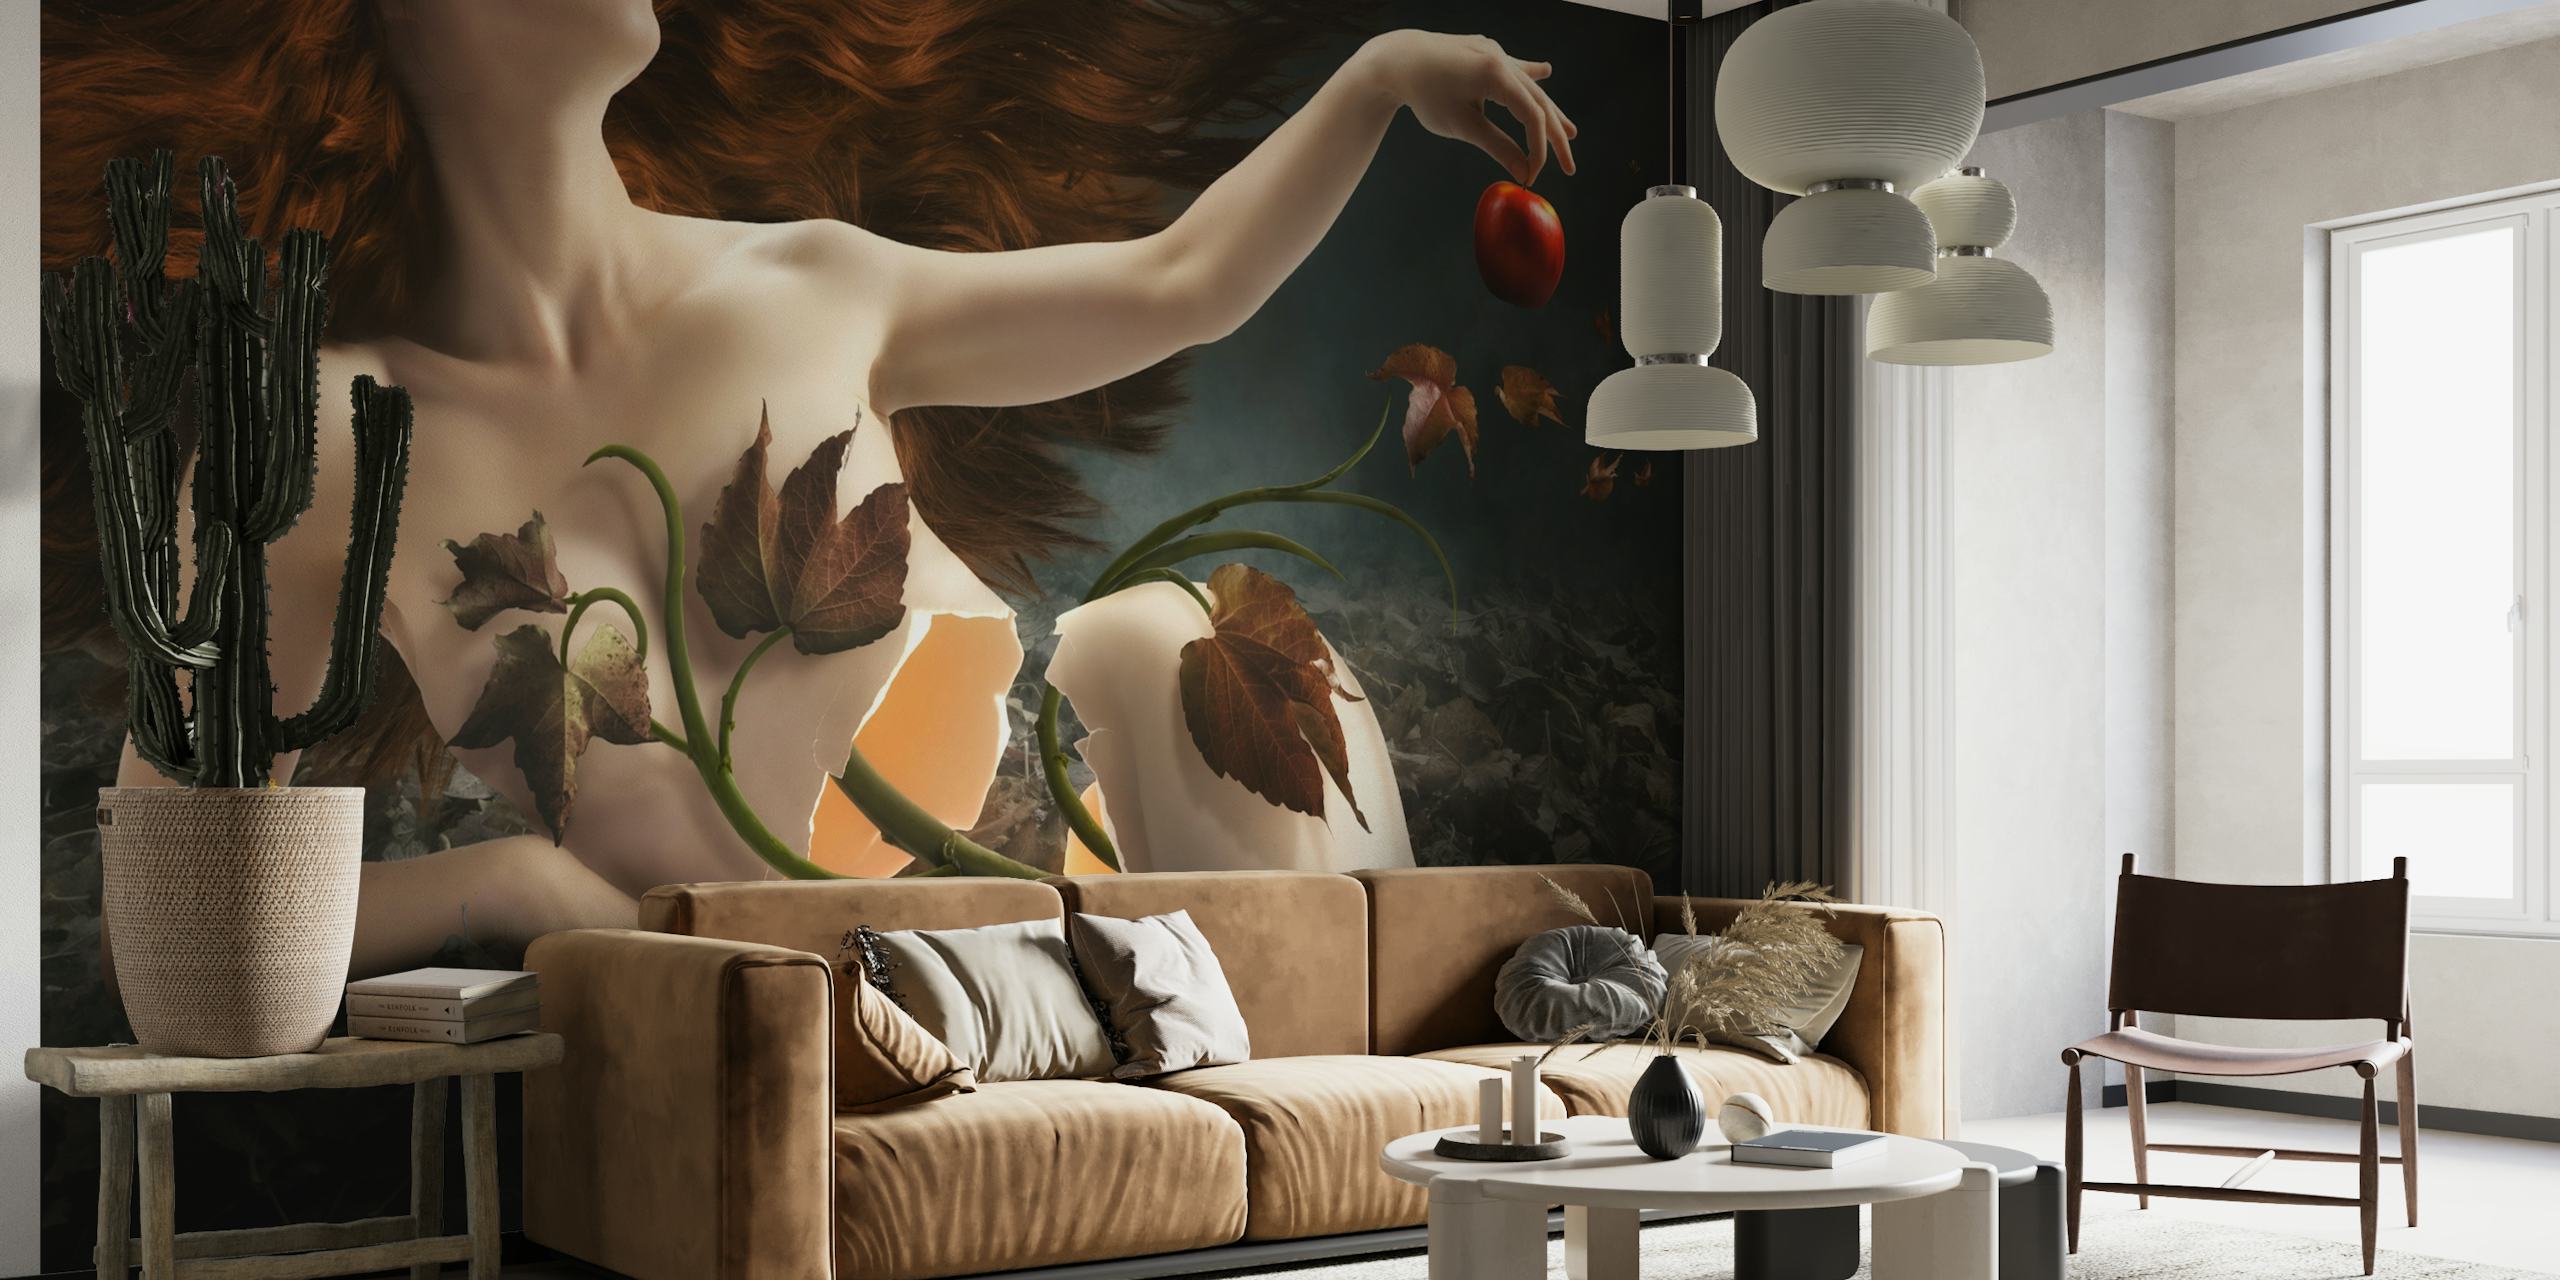 Wall mural of Eve in an enchanted garden with a dark backdrop and a symbolic apple